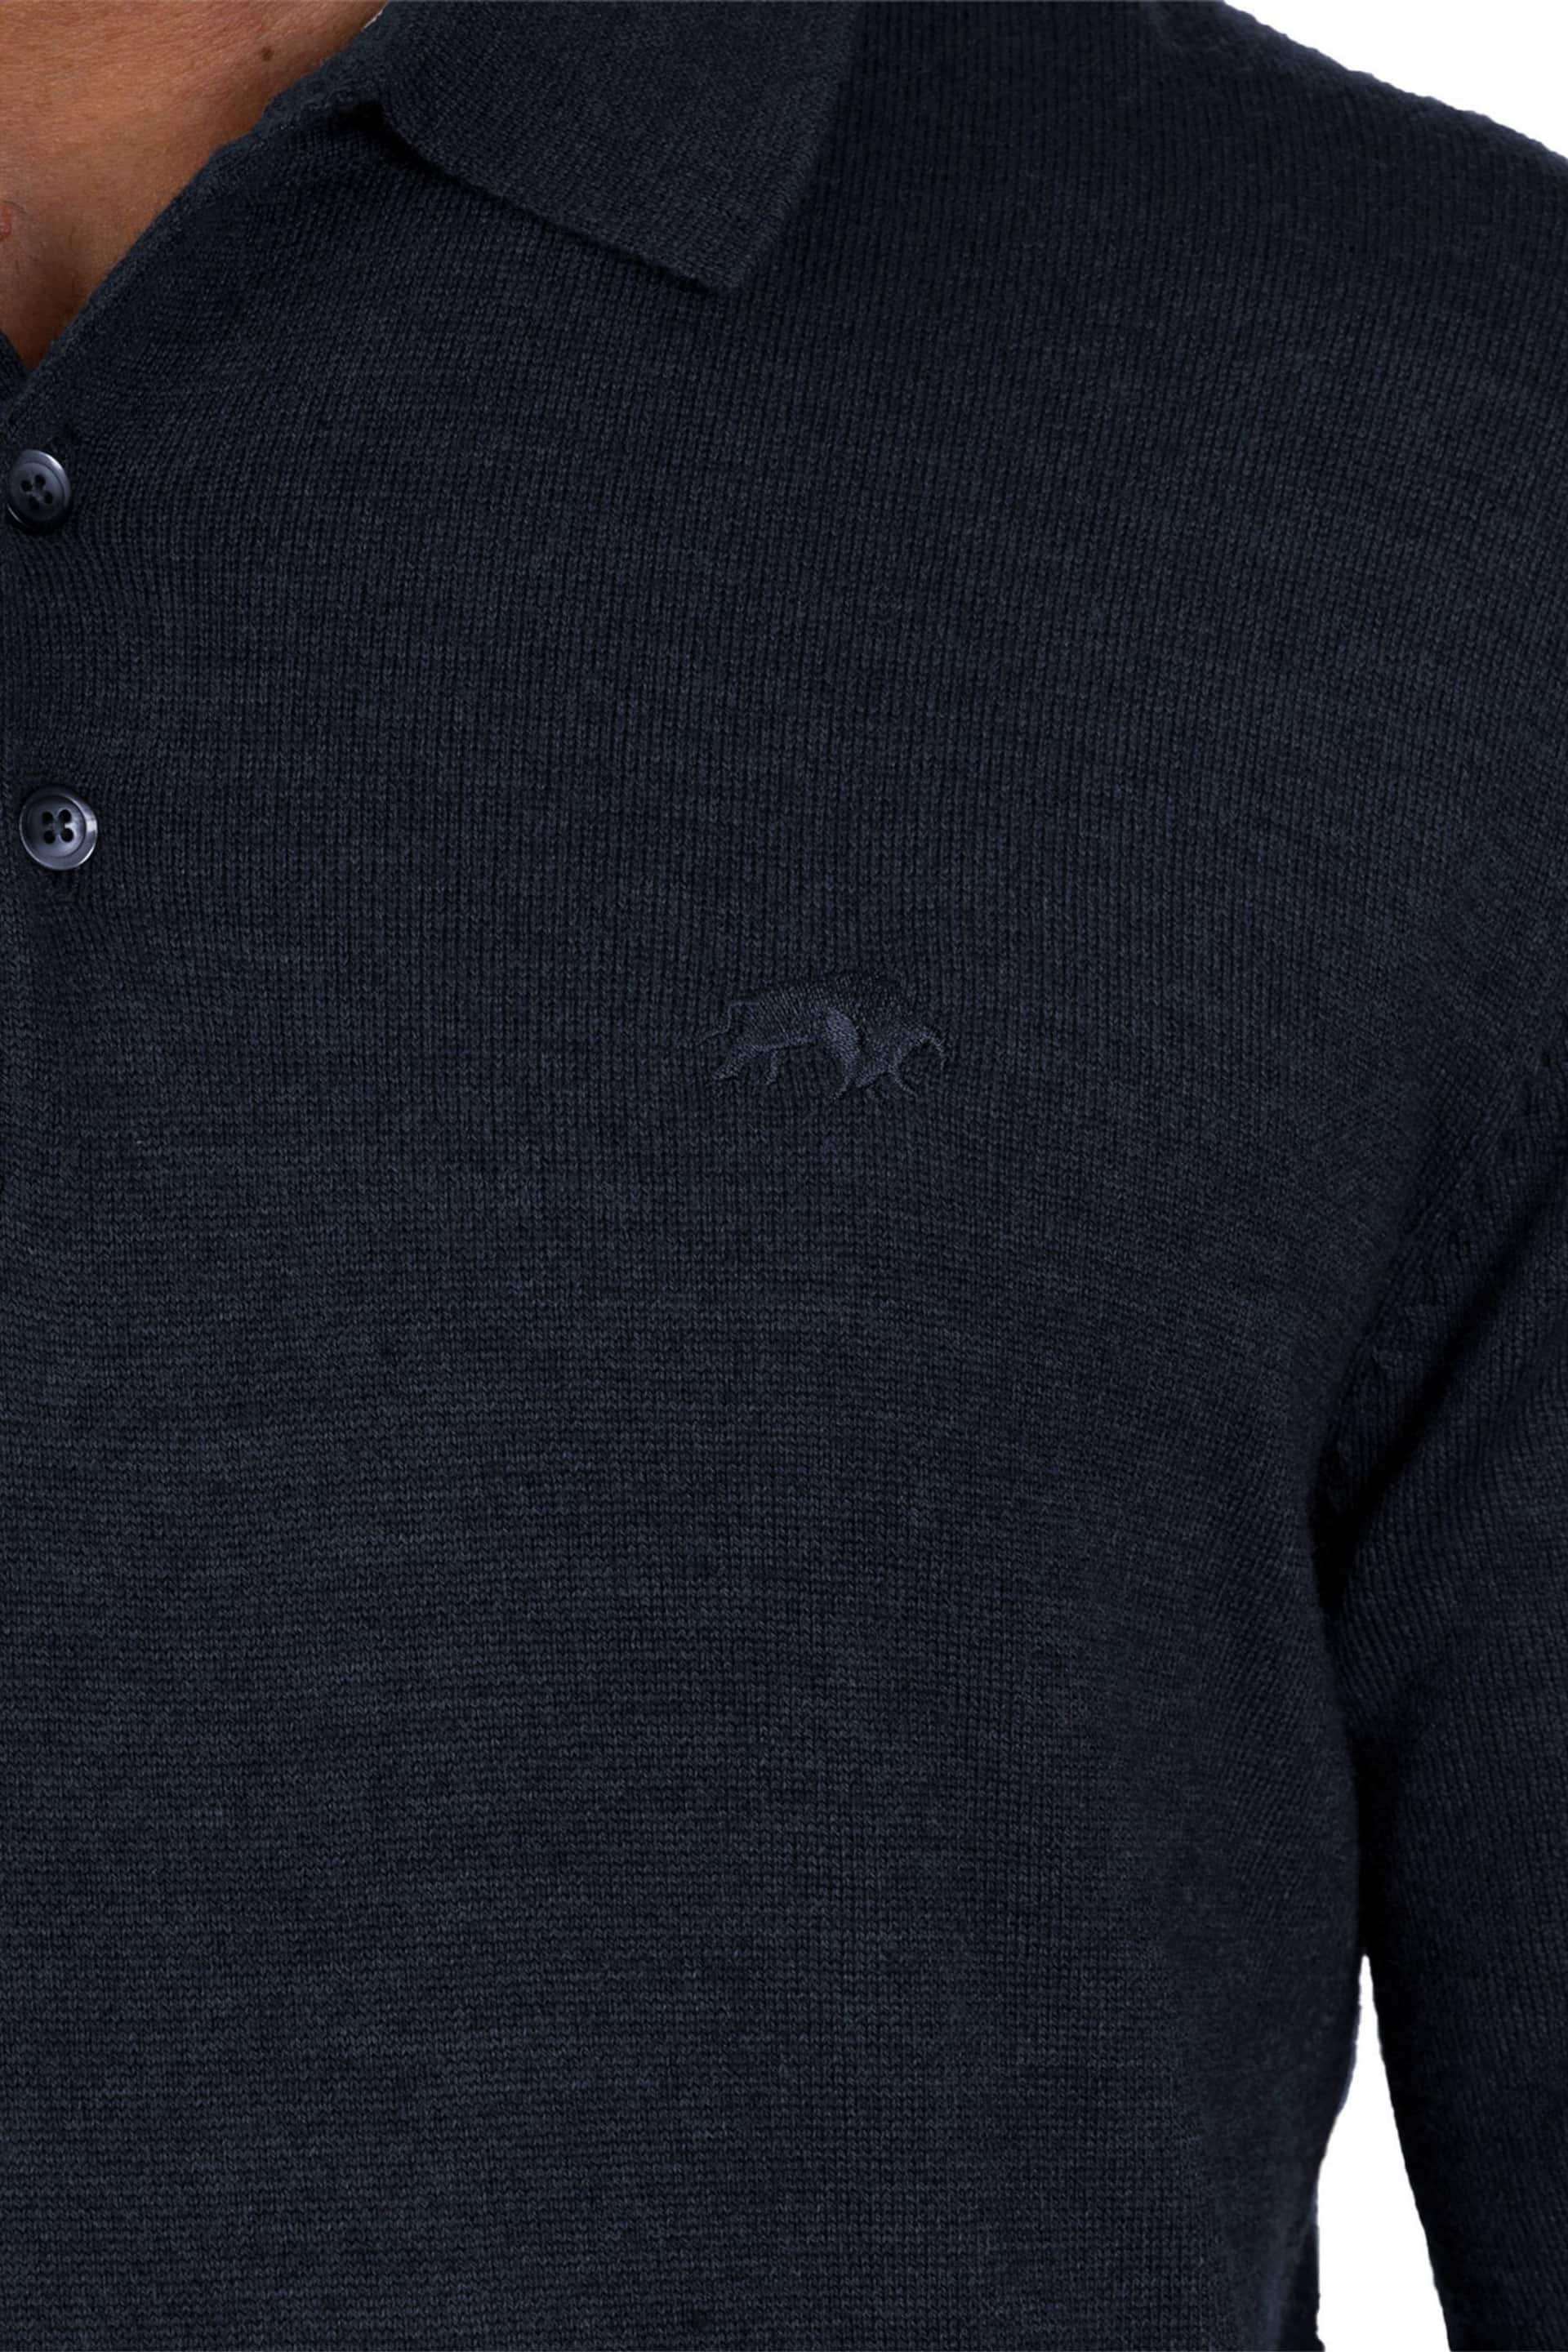 Raging Bull Long Sleeve Knitted Polo - Image 4 of 5